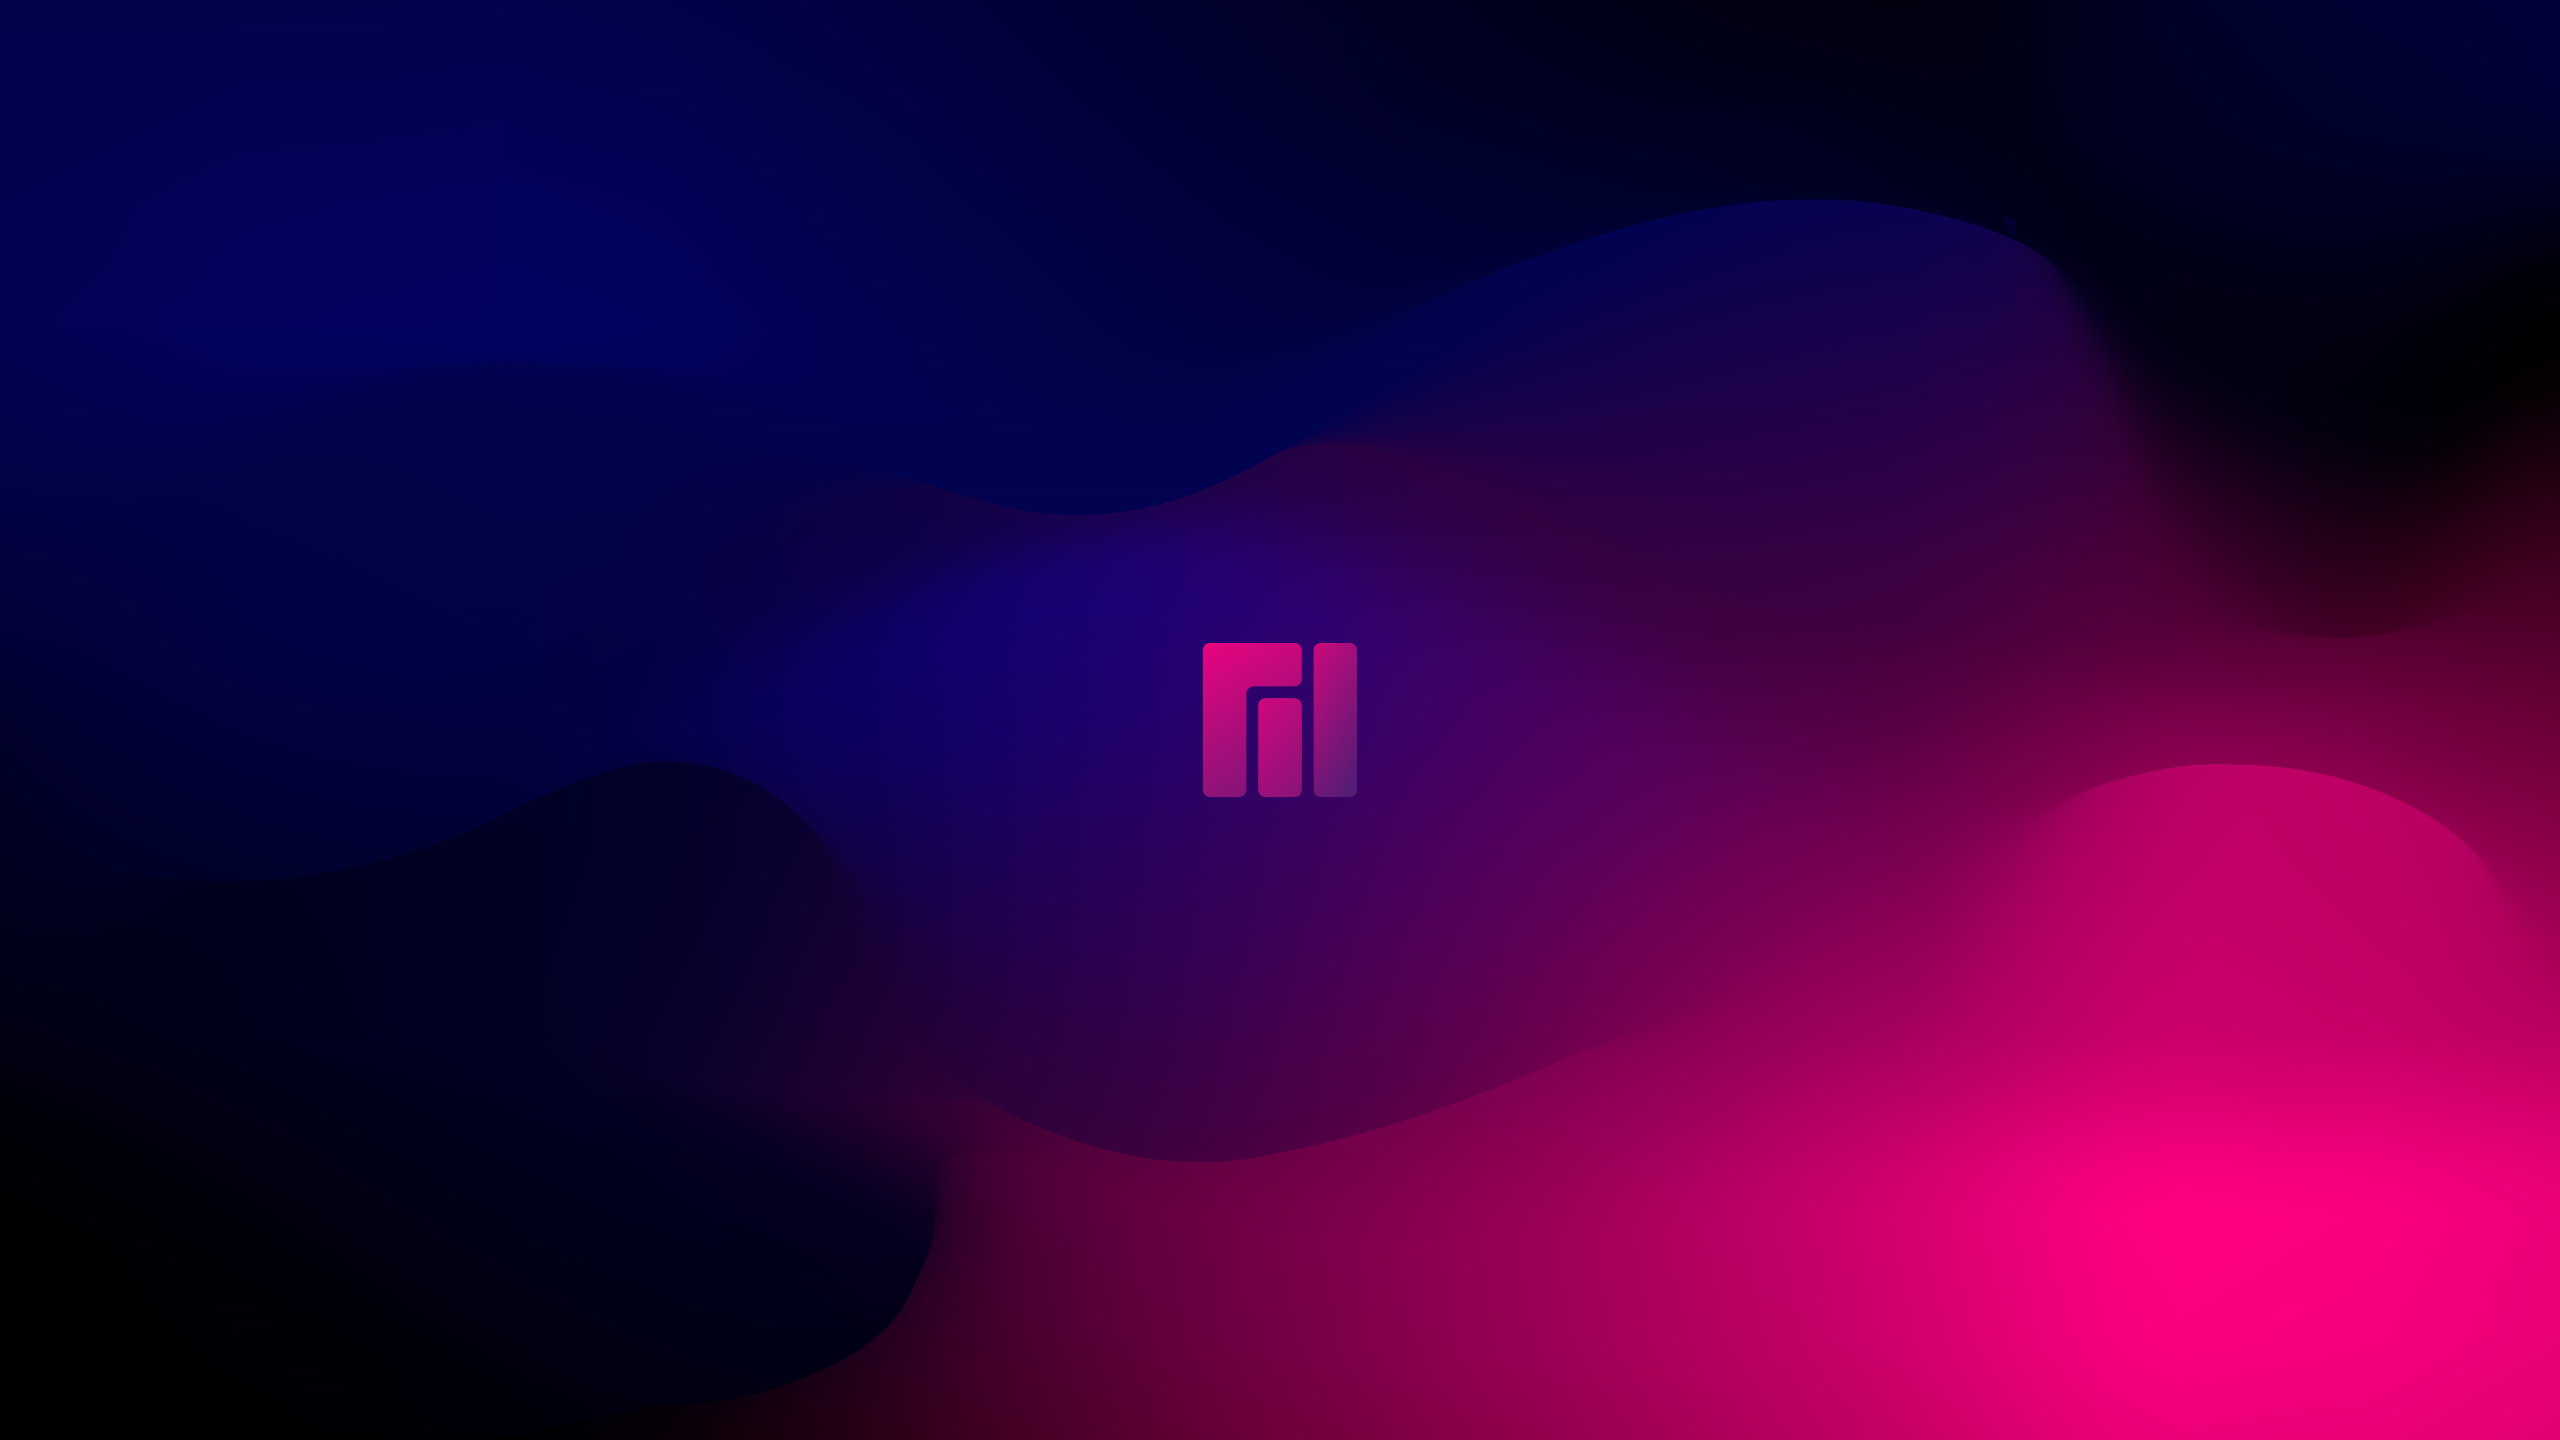 Manjaro Linux Operating System Abstract Gradient Minimalism Simple Background Logo 2560x1440